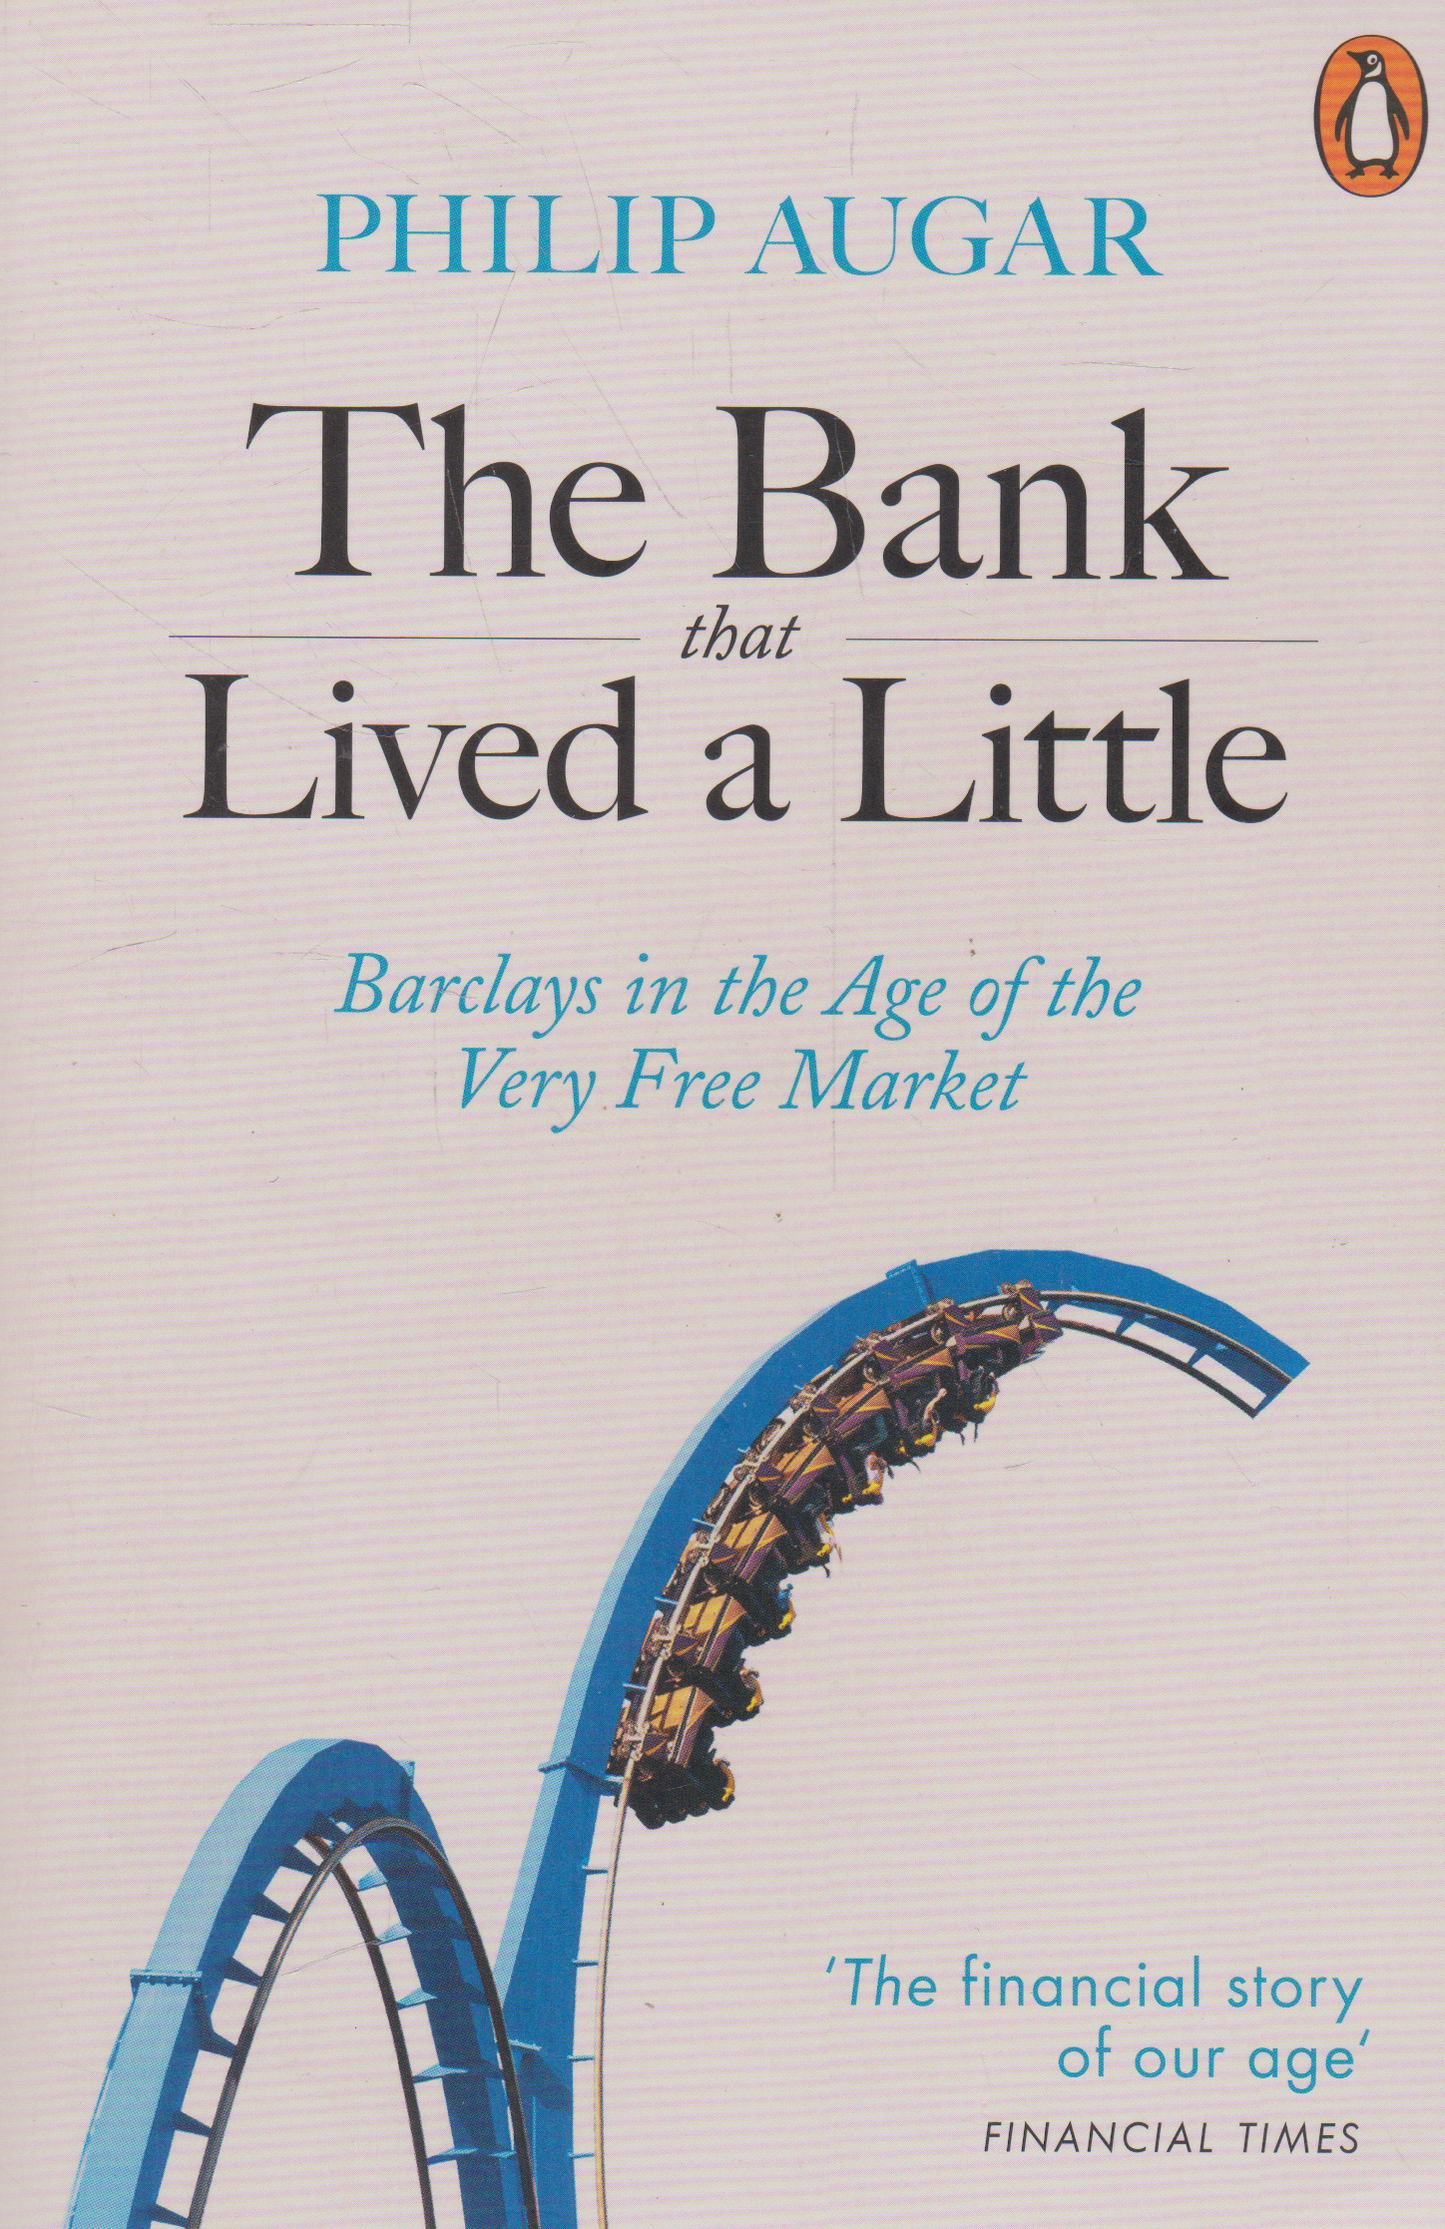 Philip Augar - The Bank that Lived a Little: Barclays in the Age of the Very Free Market